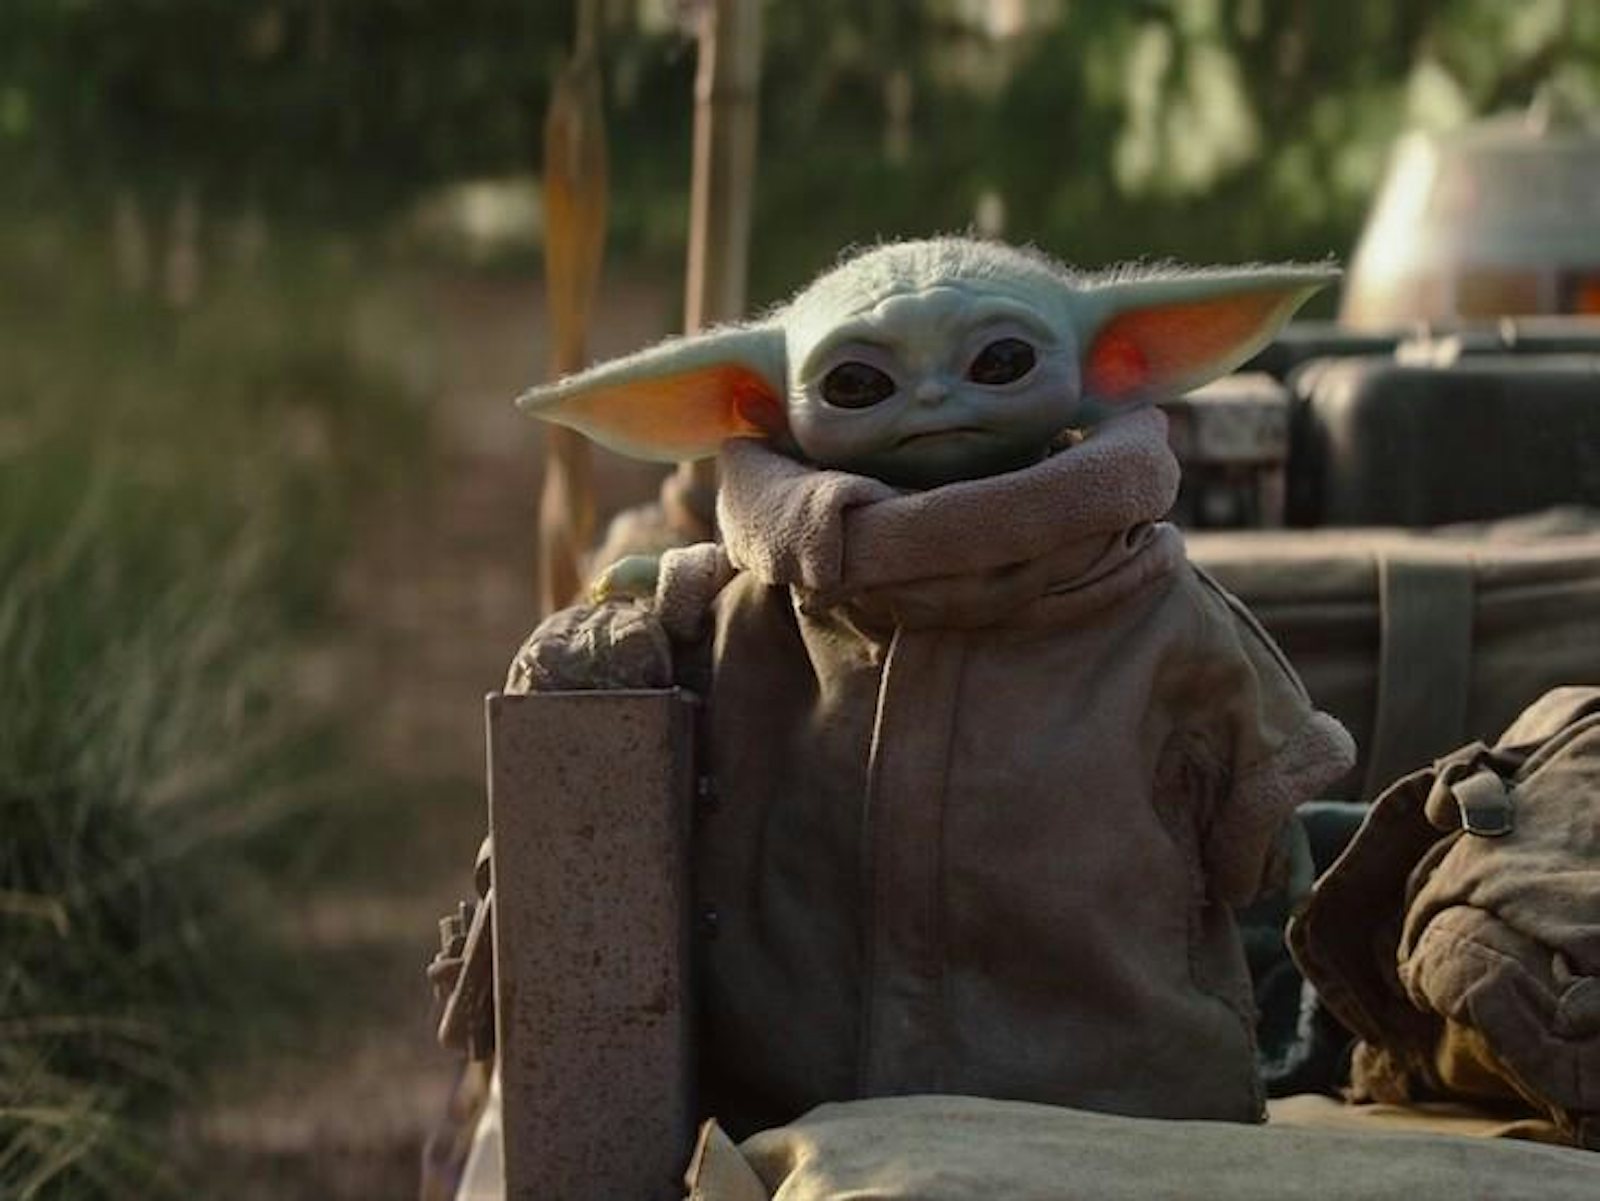 What Makes Baby Yoda So Lovable? - Nautilus